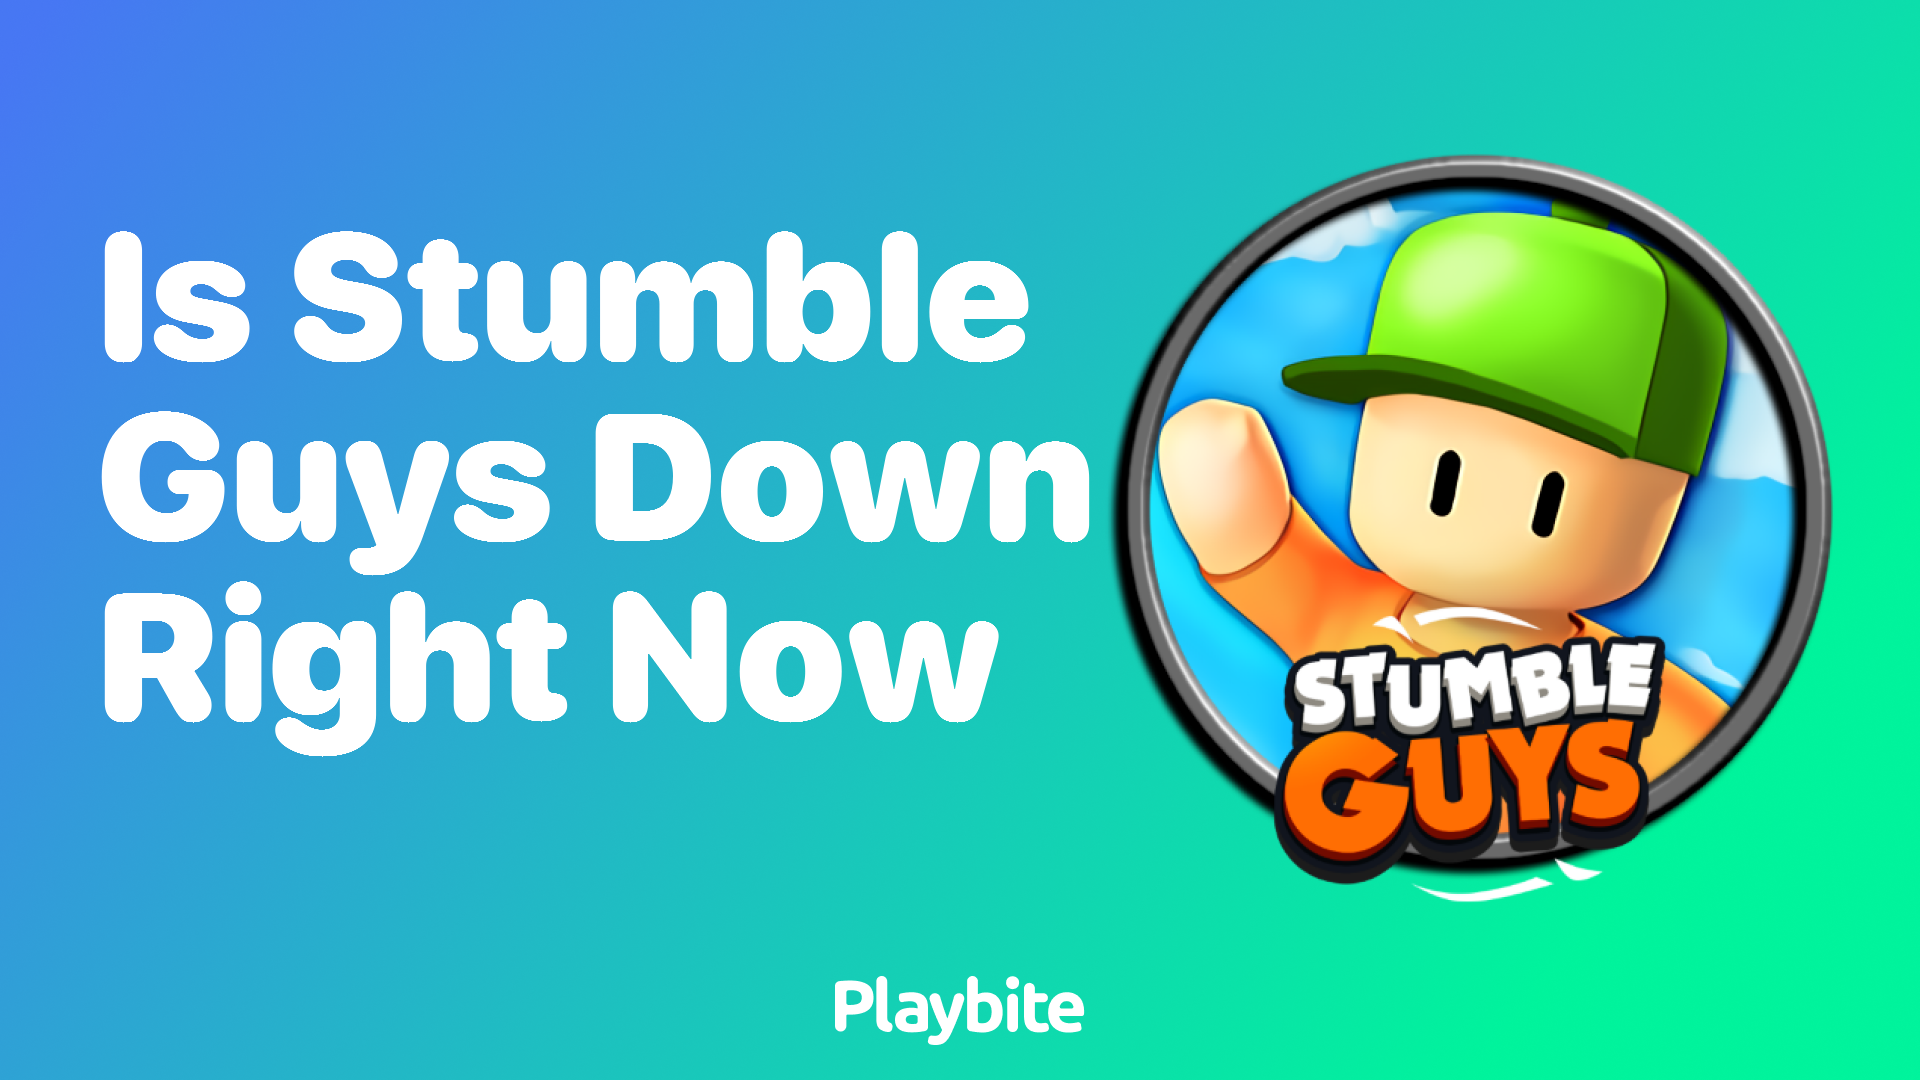 Is Stumble Guys Down Right Now? Let&#8217;s Find Out!